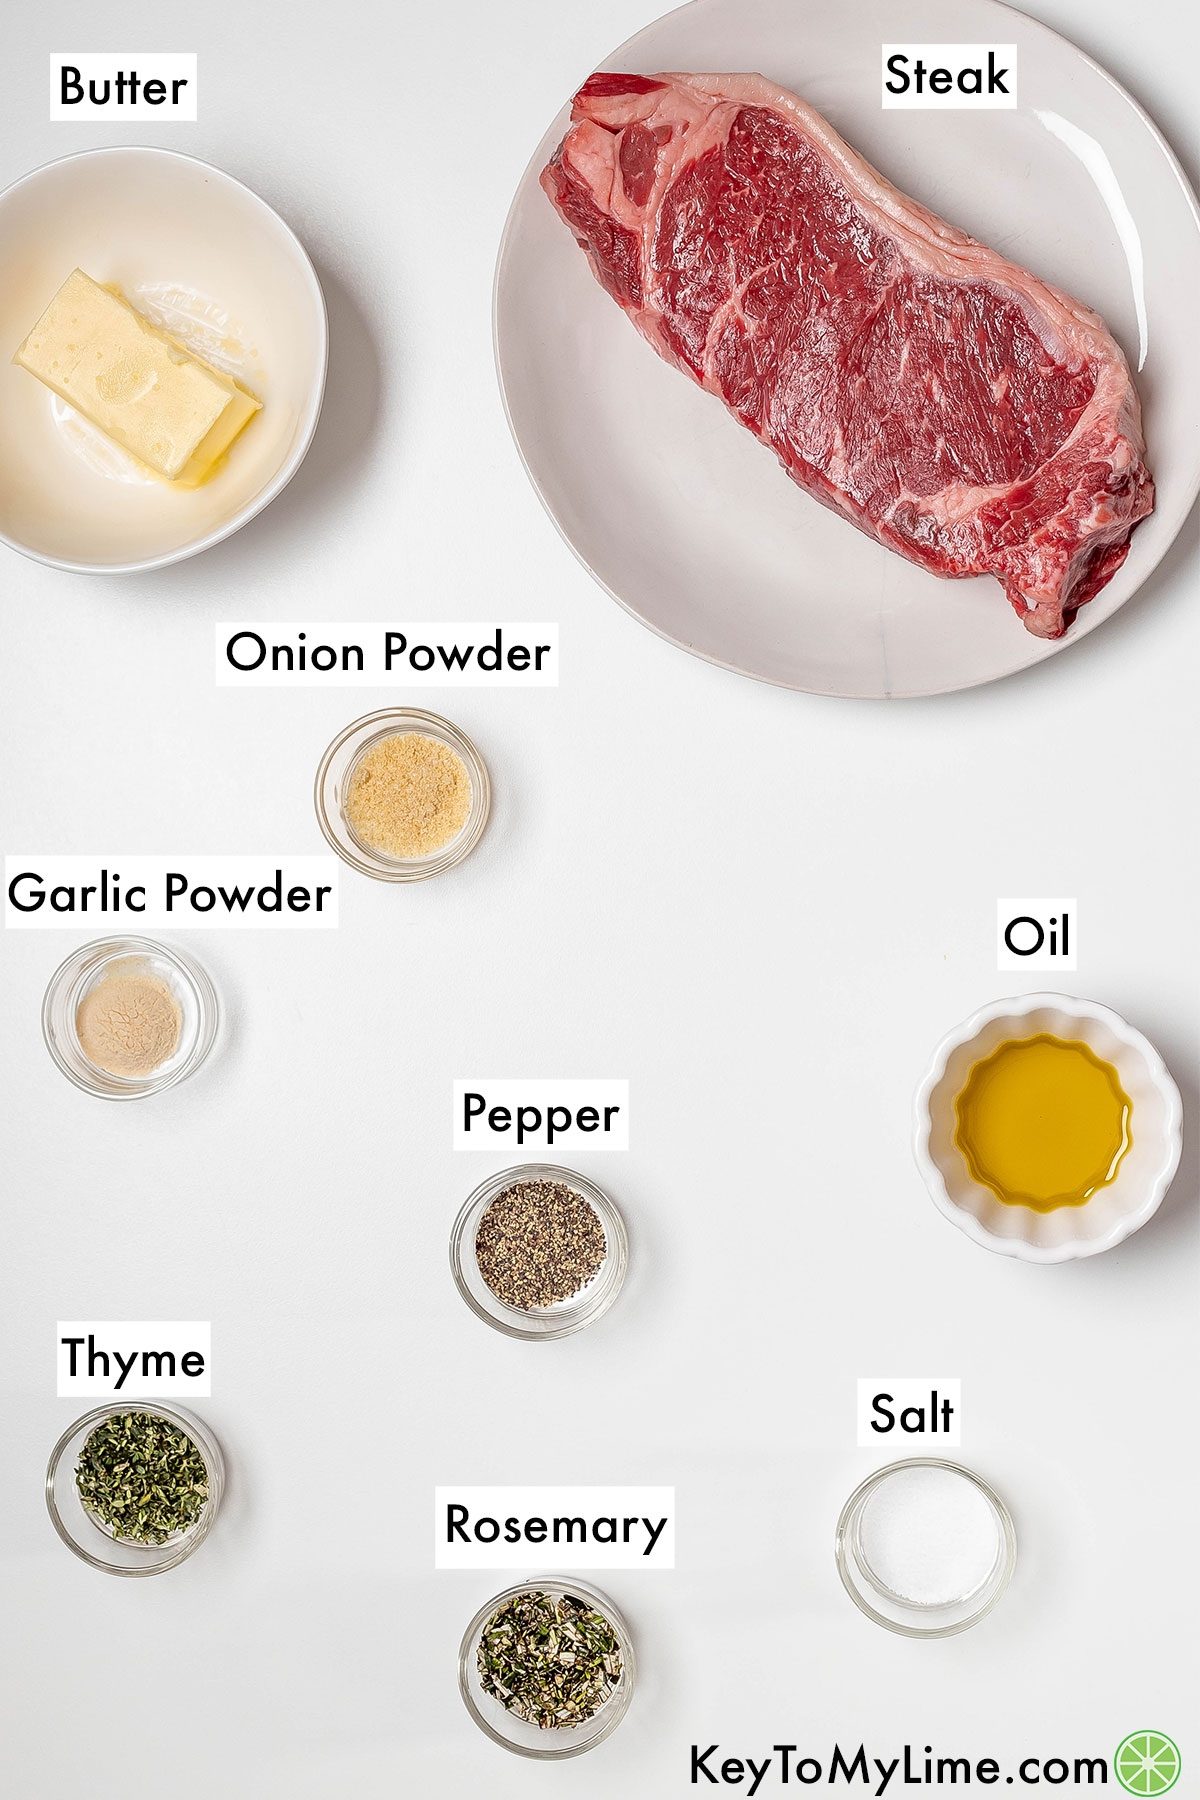 The labeled ingredients for air fryer steak.